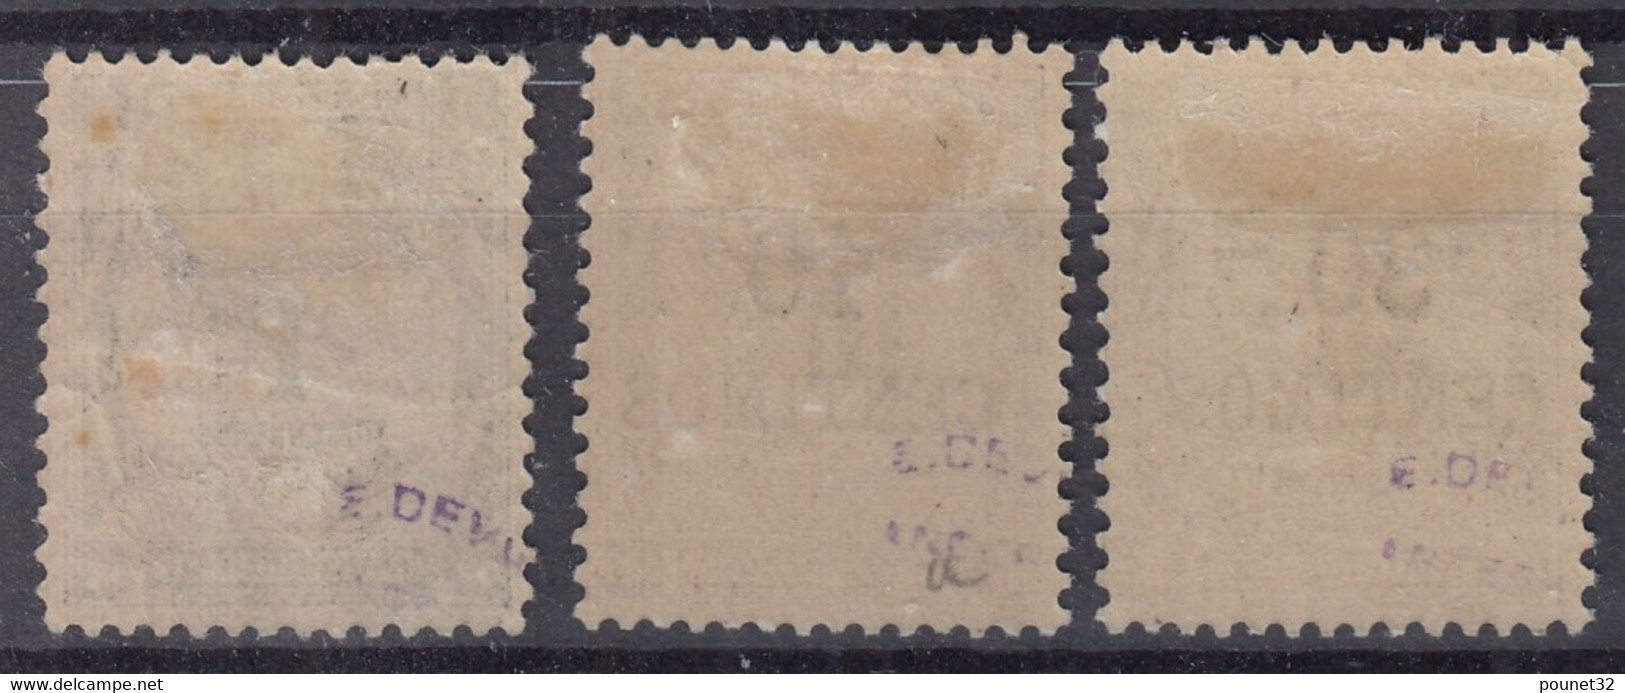 MAROC : TAXE VALEURS IMPAYEES N° 6/8 NEUFS * GOMME AVEC CHARNIERE - COTE 111 € - Timbres-taxe